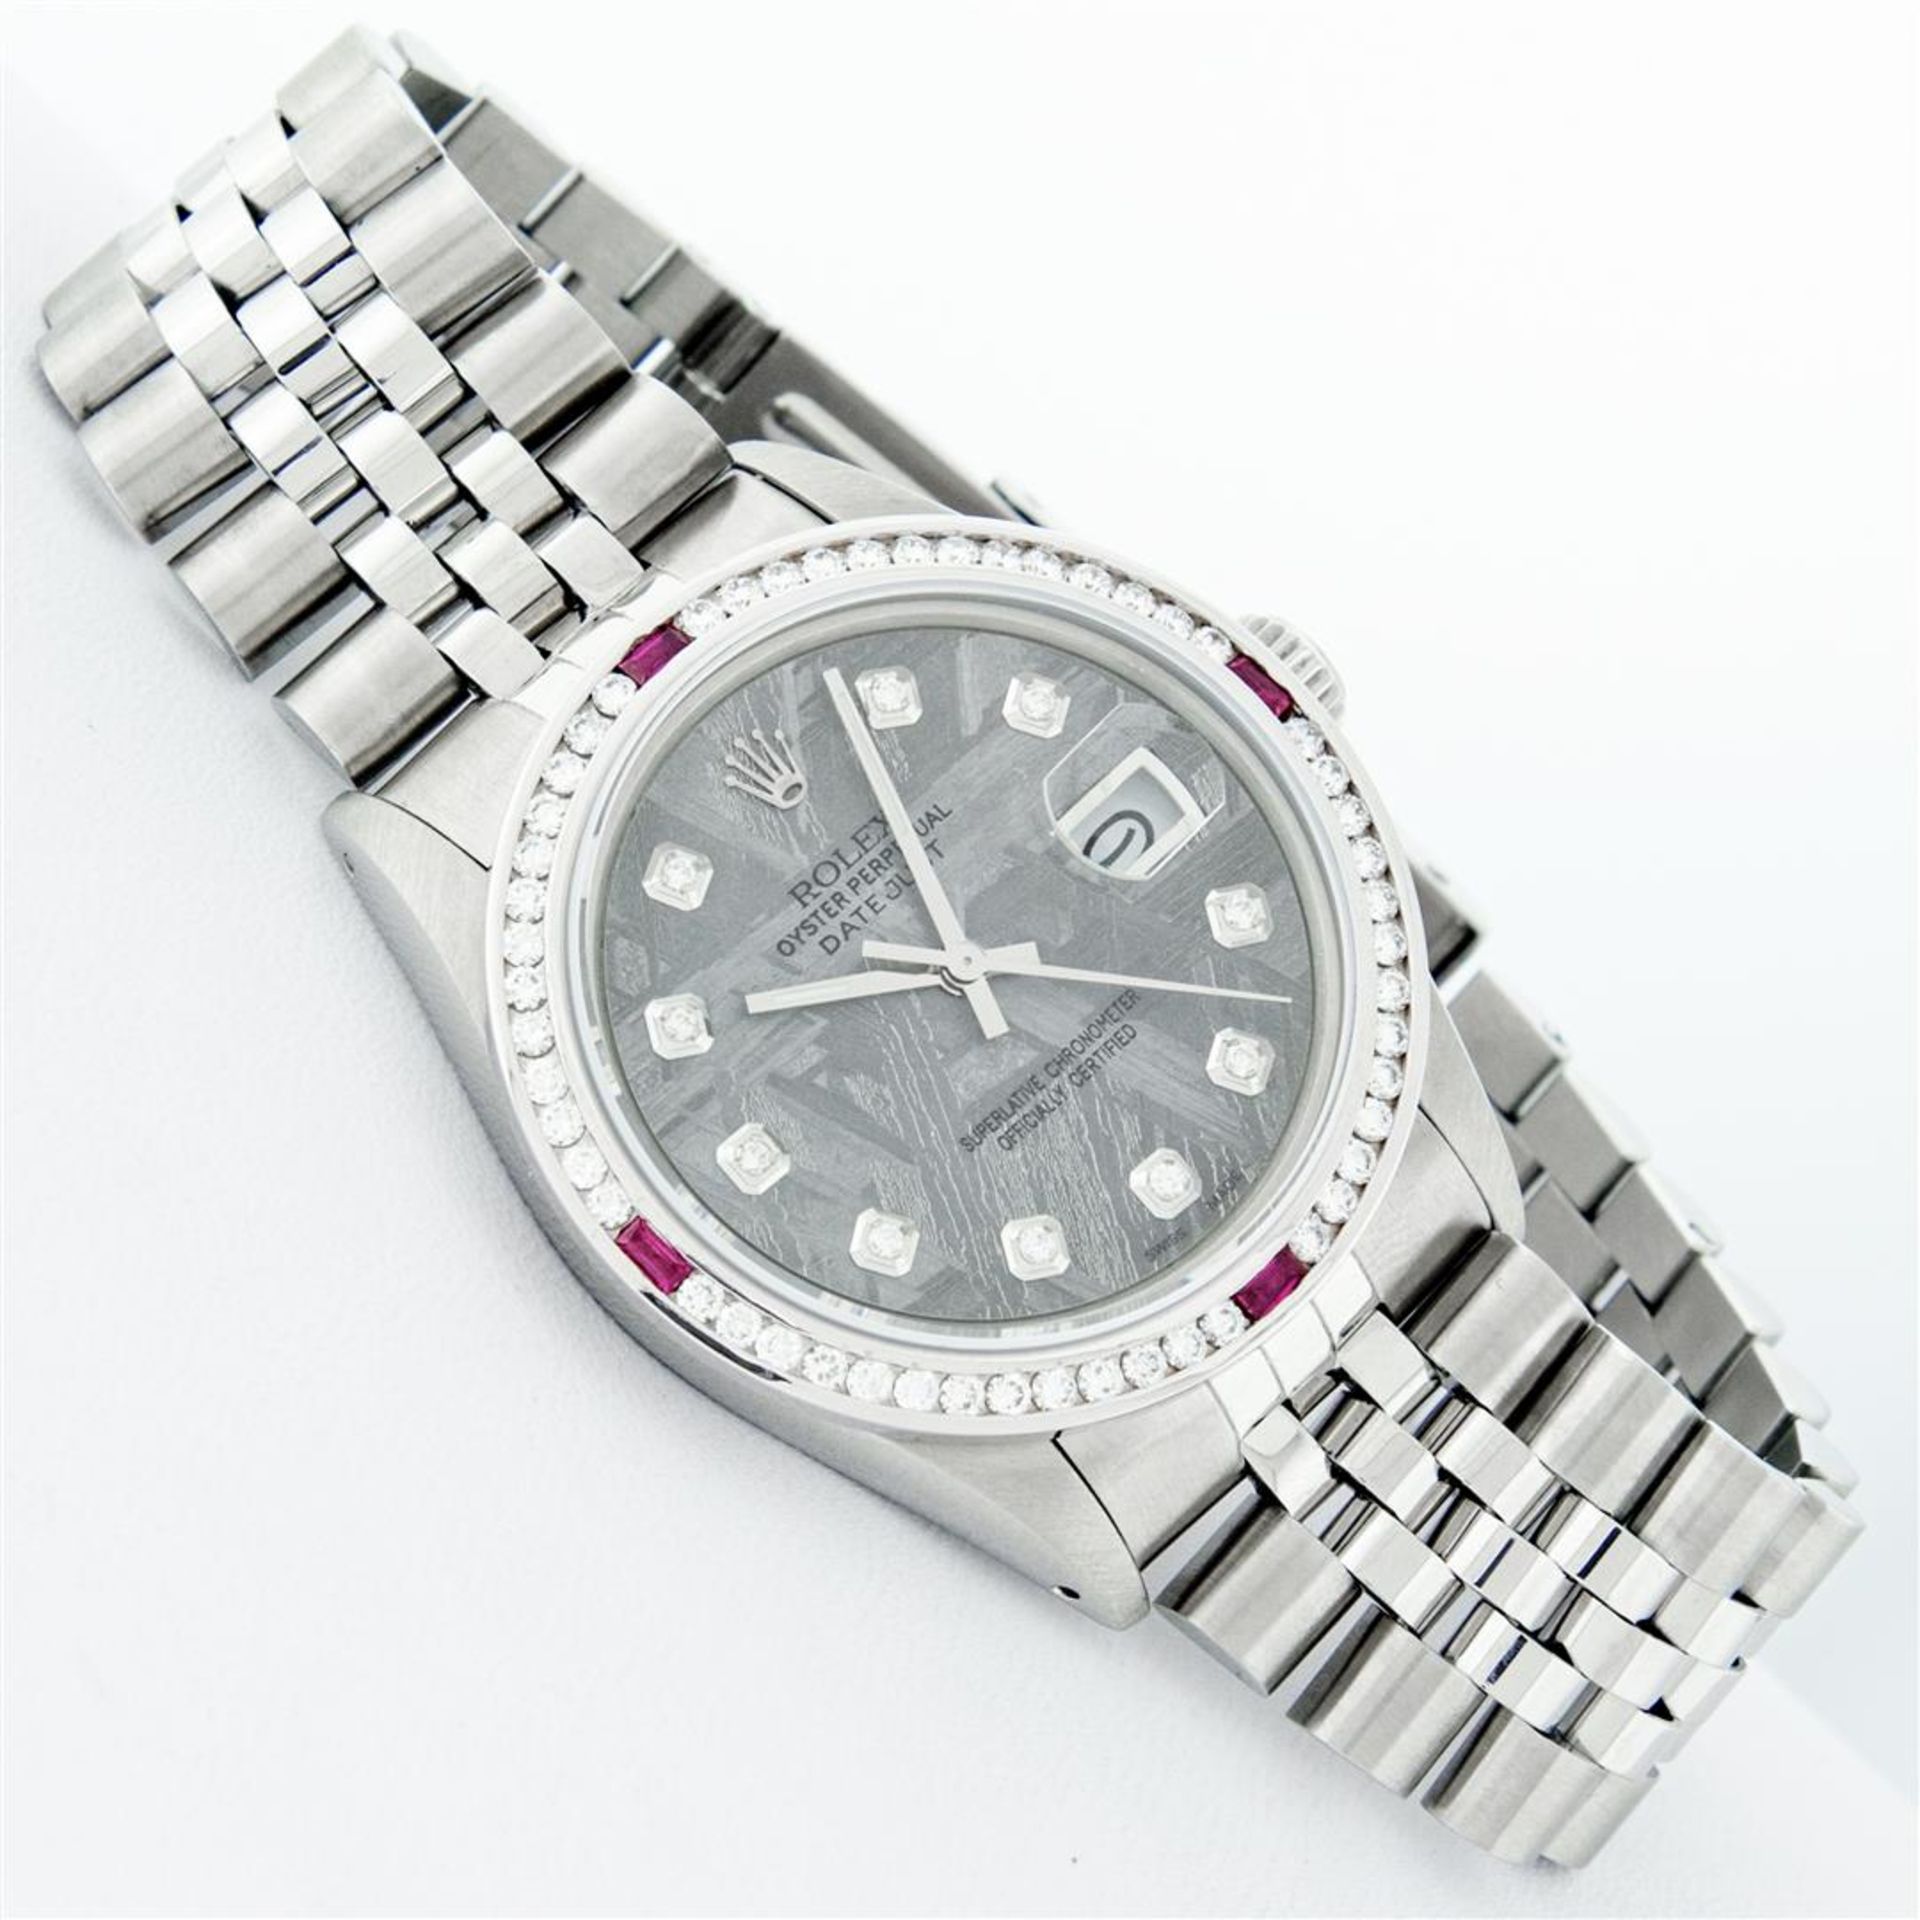 Rolex Mens SS Meteorite Diamond & Ruby Channel Set Oyster Perpetual Datejust Wri - Image 3 of 9